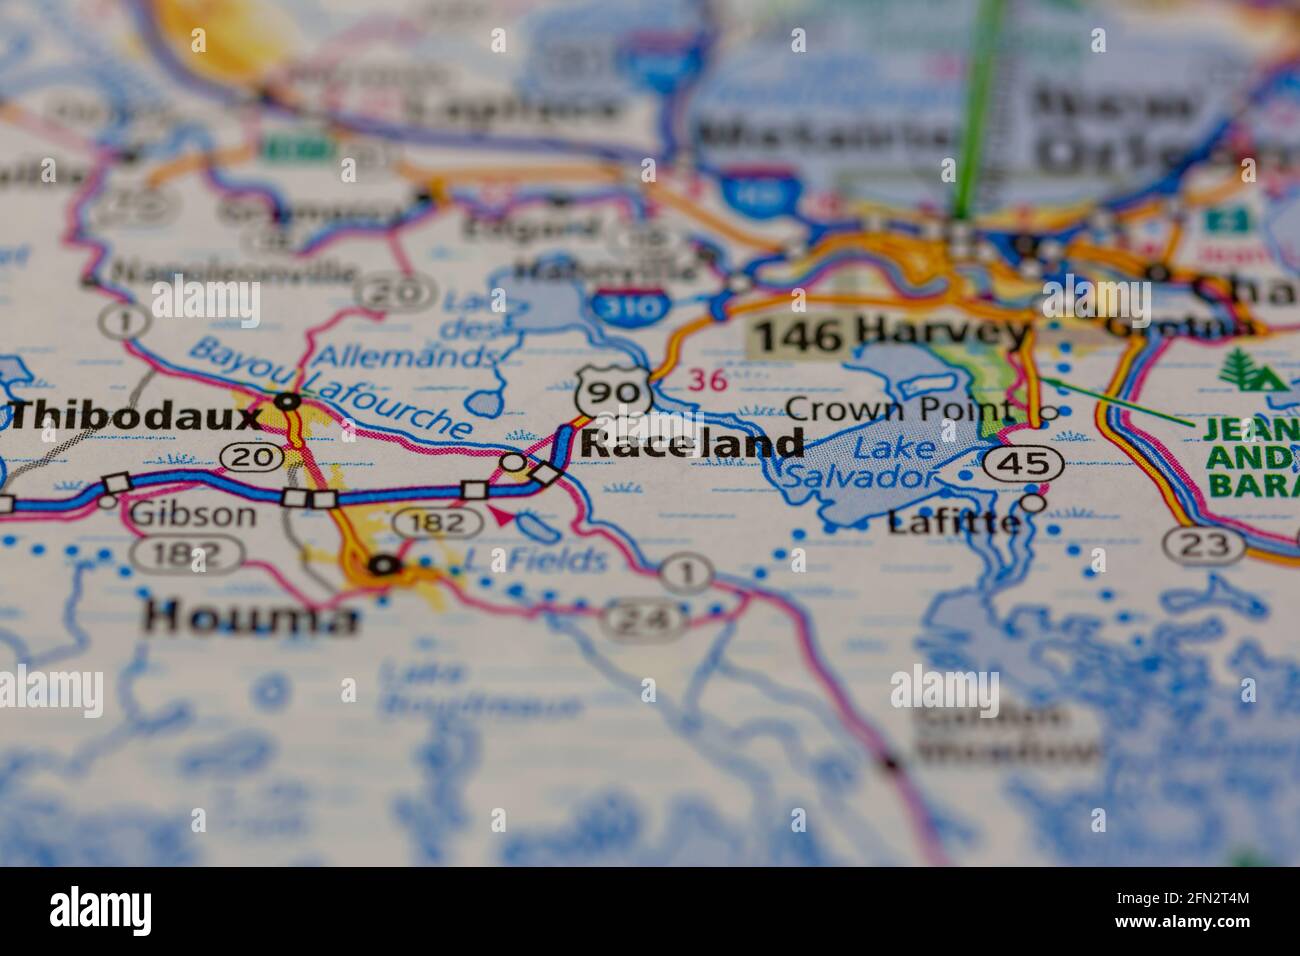 Raceland Louisiana USA Shown on a Geography map or road map Stock Photo